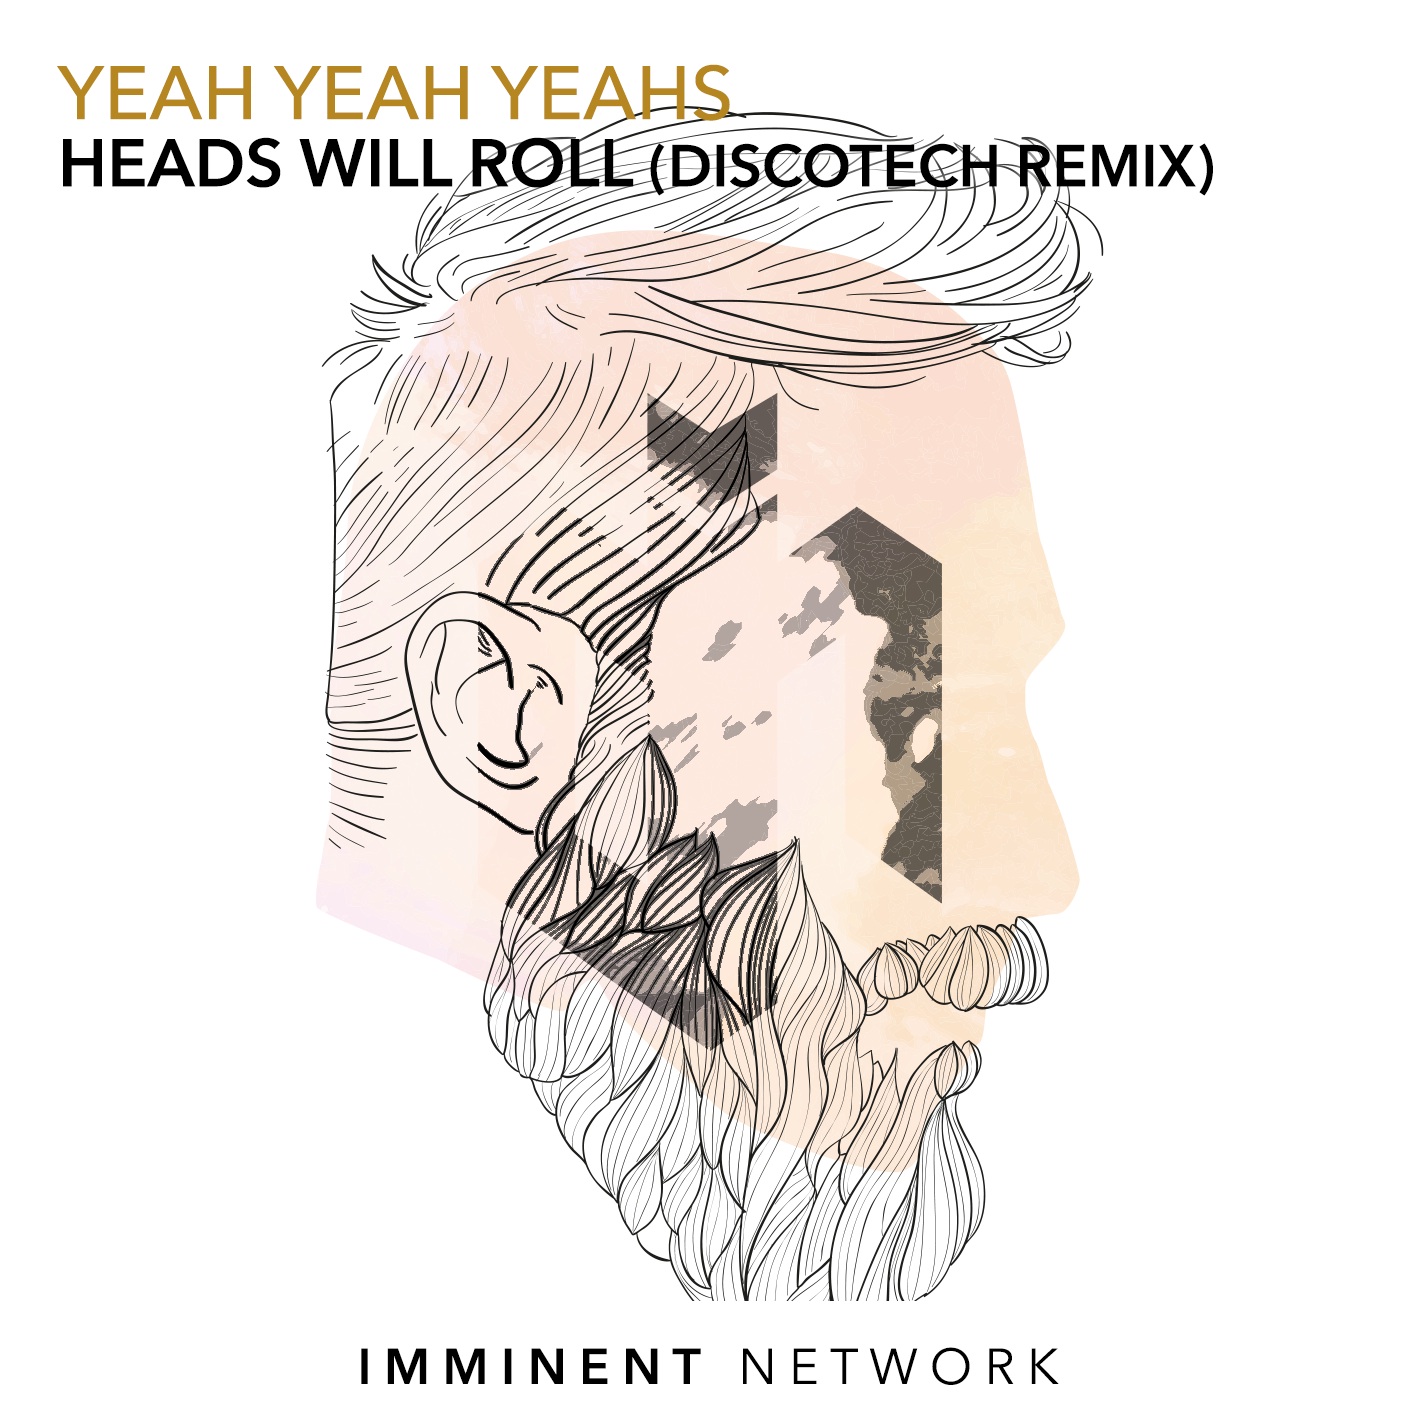 Yeah yeah yeah will roll remix. Heads will Roll Discotech Remix. Yeah yeah yeahs x a Trak - heads will Roll (Discotech Remix). Yeah yeah yeahs - heads will Roll (a-Trak Club Mix). Yeah yeah yeahs Remix.